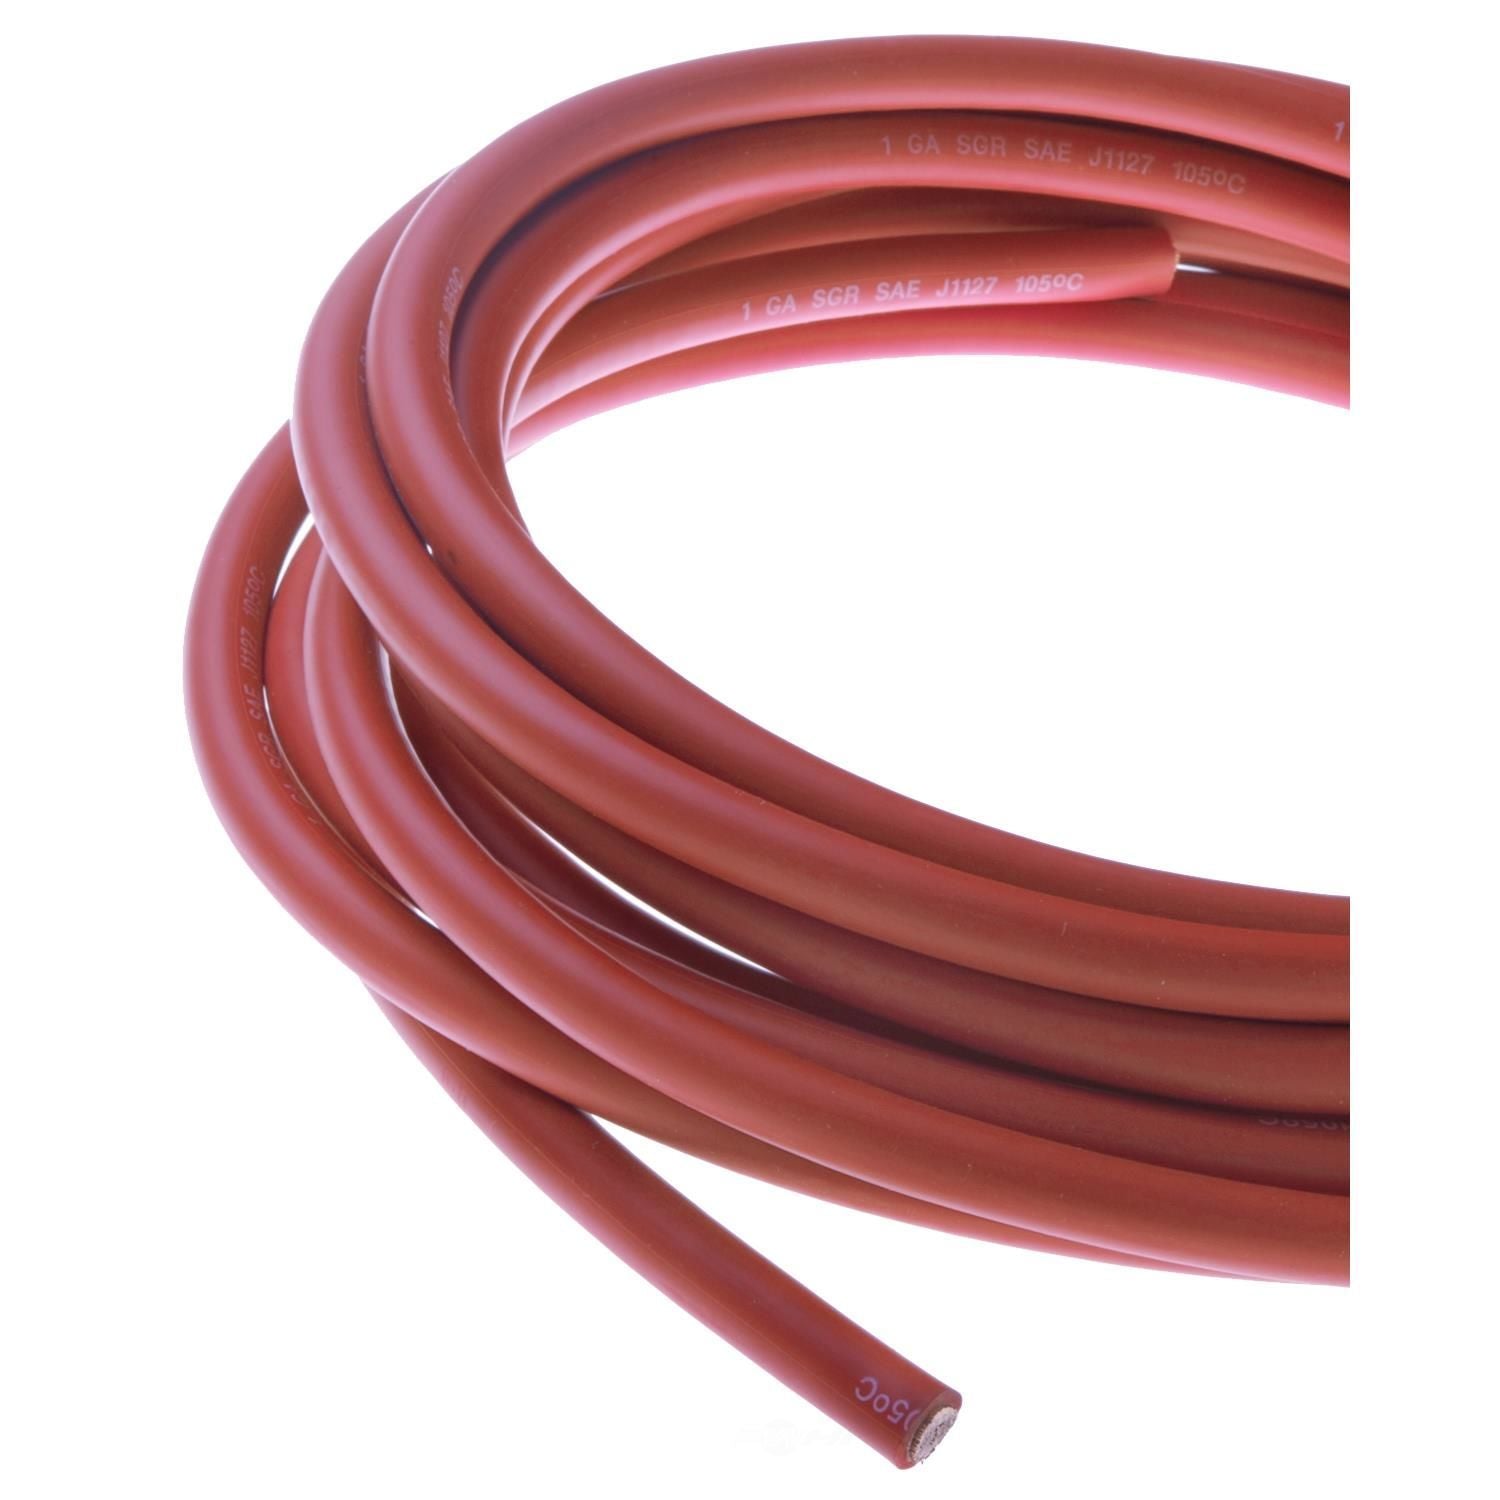 YSP CB61RD-25 Wells Welding Cable (Red, 25', 2G)